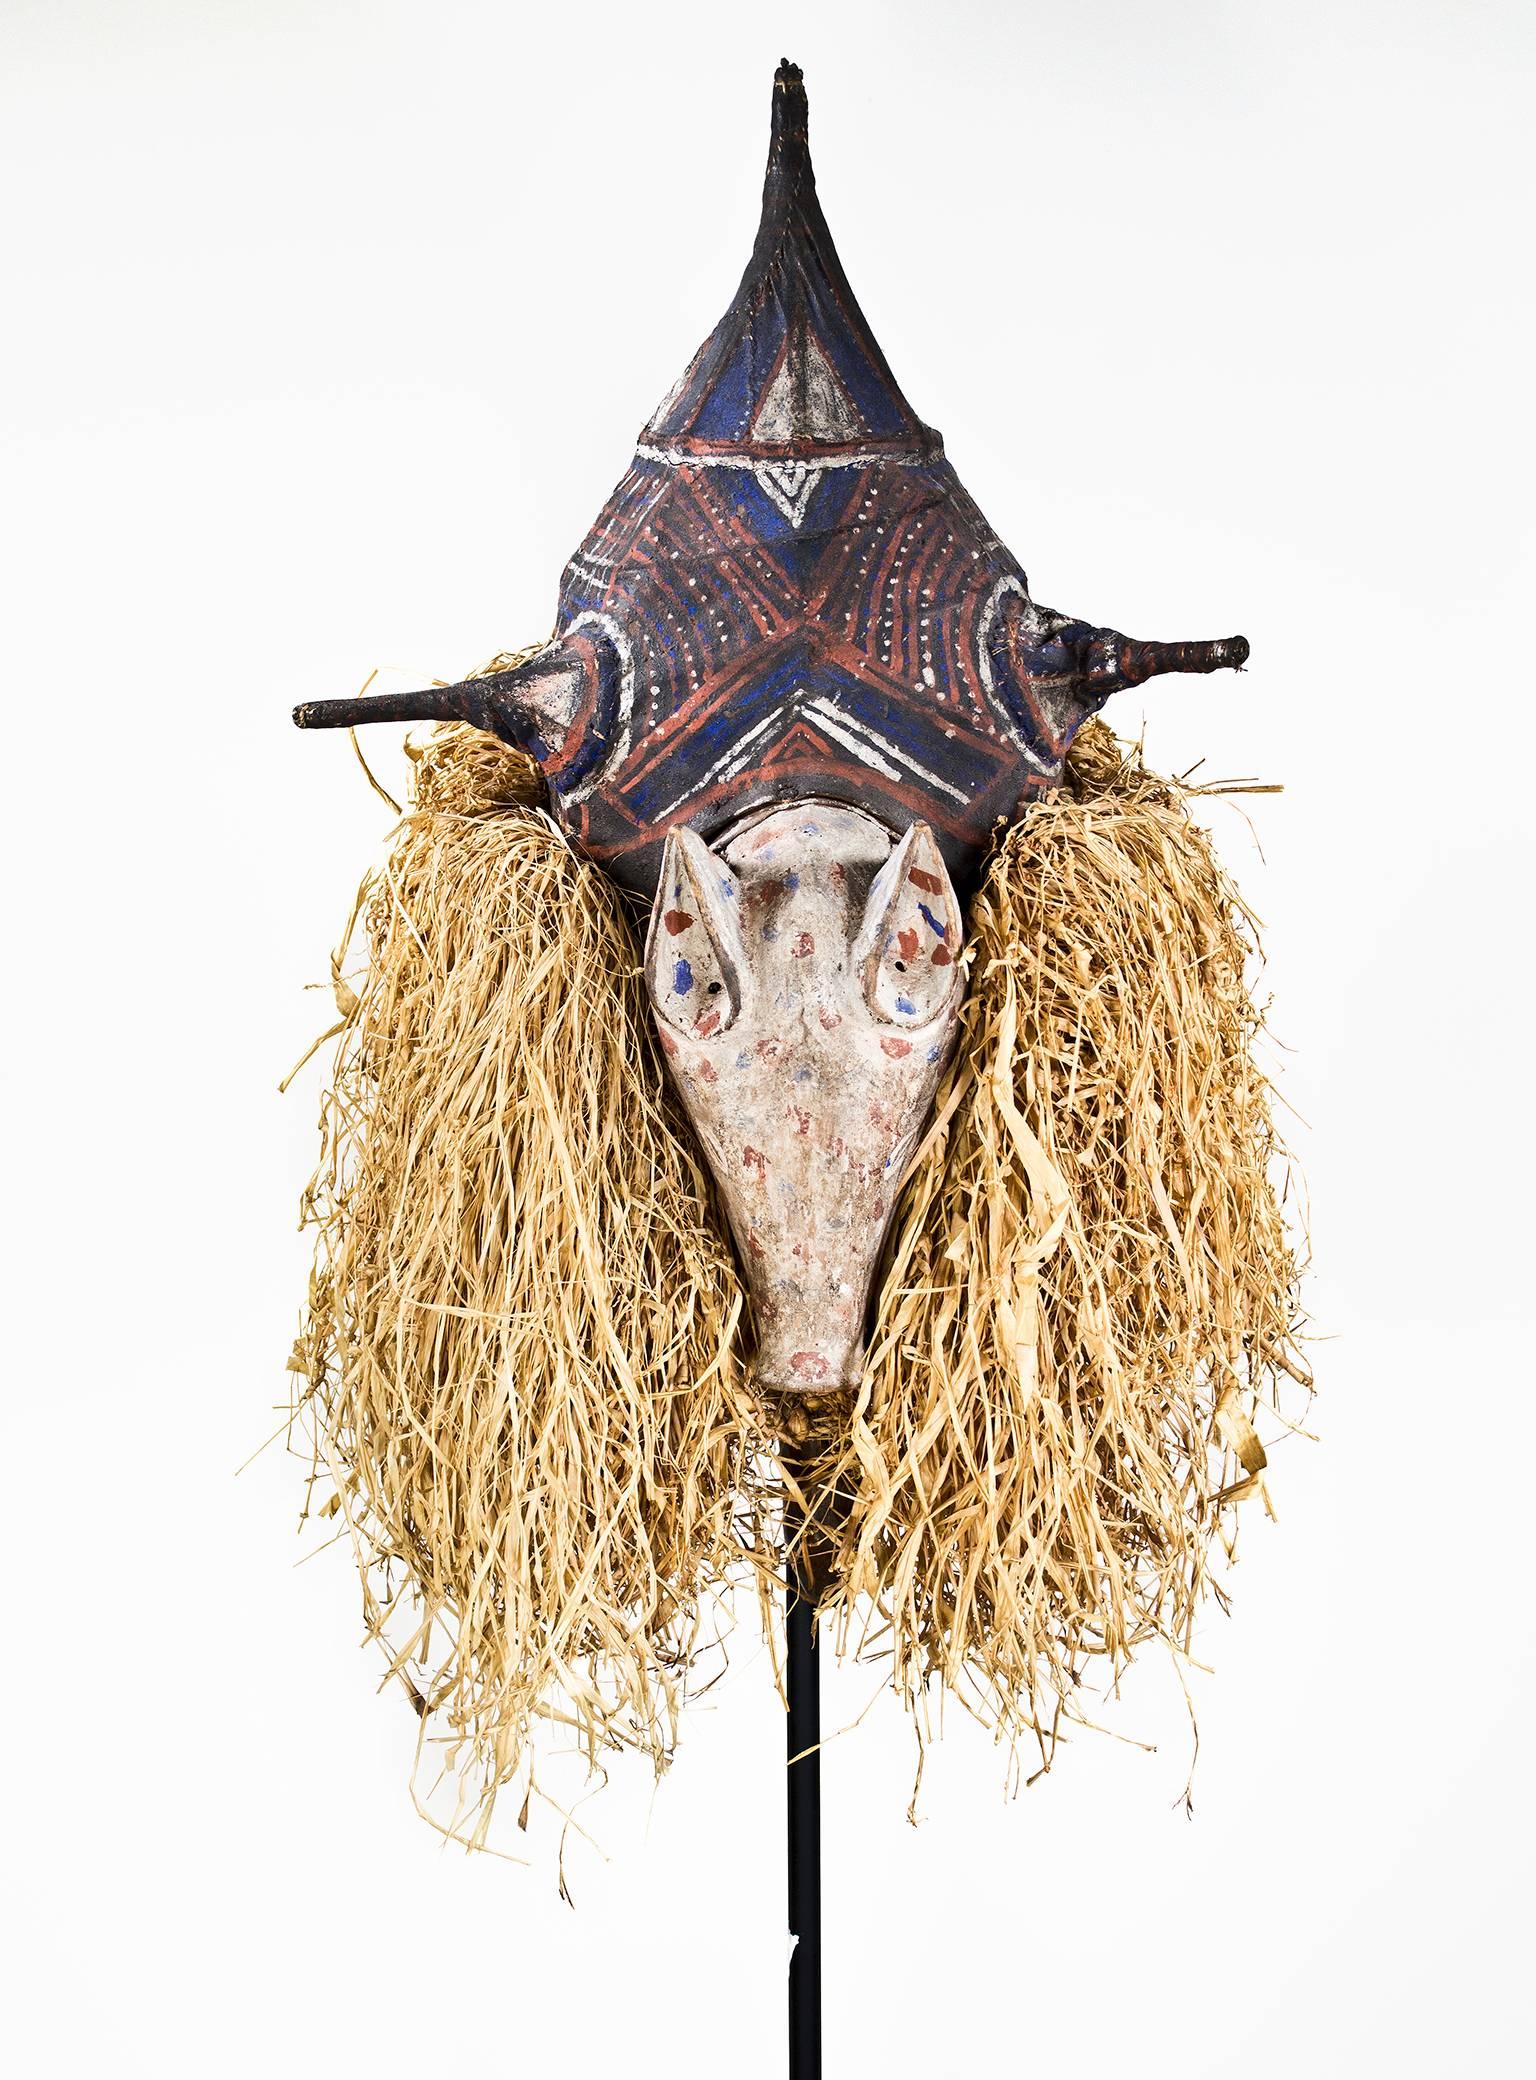 "Yaka Ceremonial Mask--Zaire, " Wood, Fiber, and Paint Mask  - Sculpture by Unknown